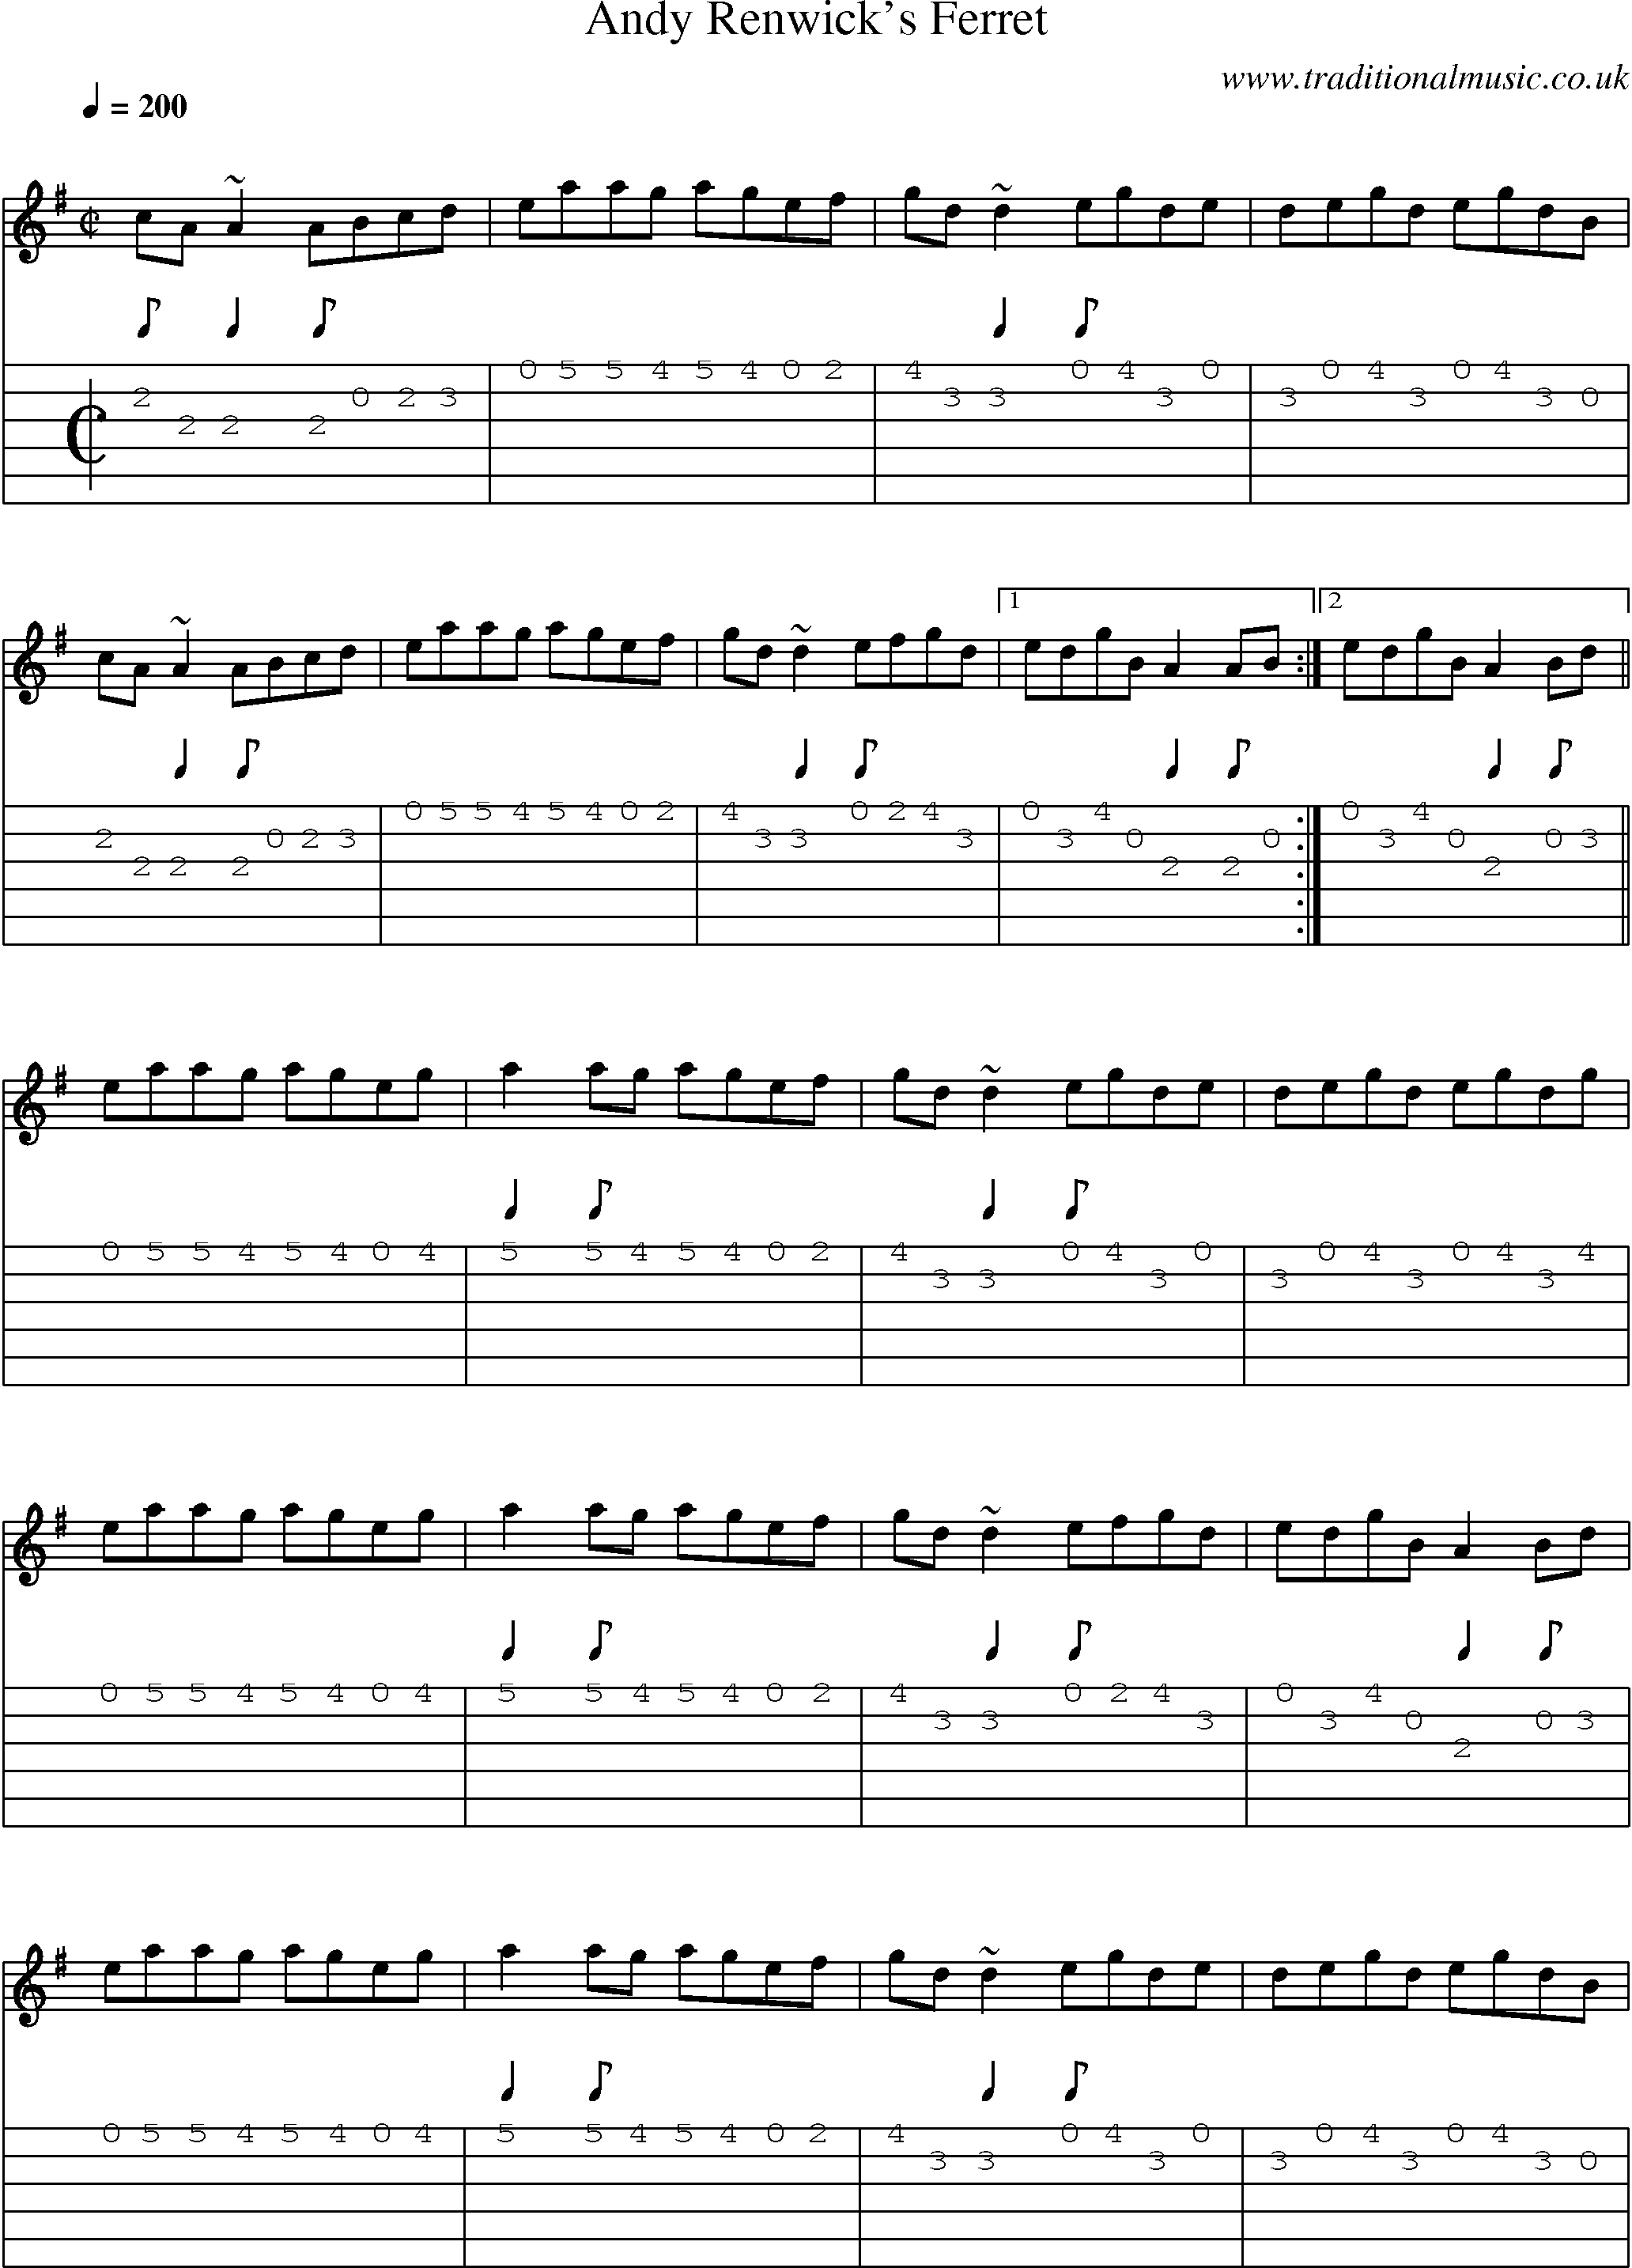 Music Score and Guitar Tabs for Andy Renwicks Ferret